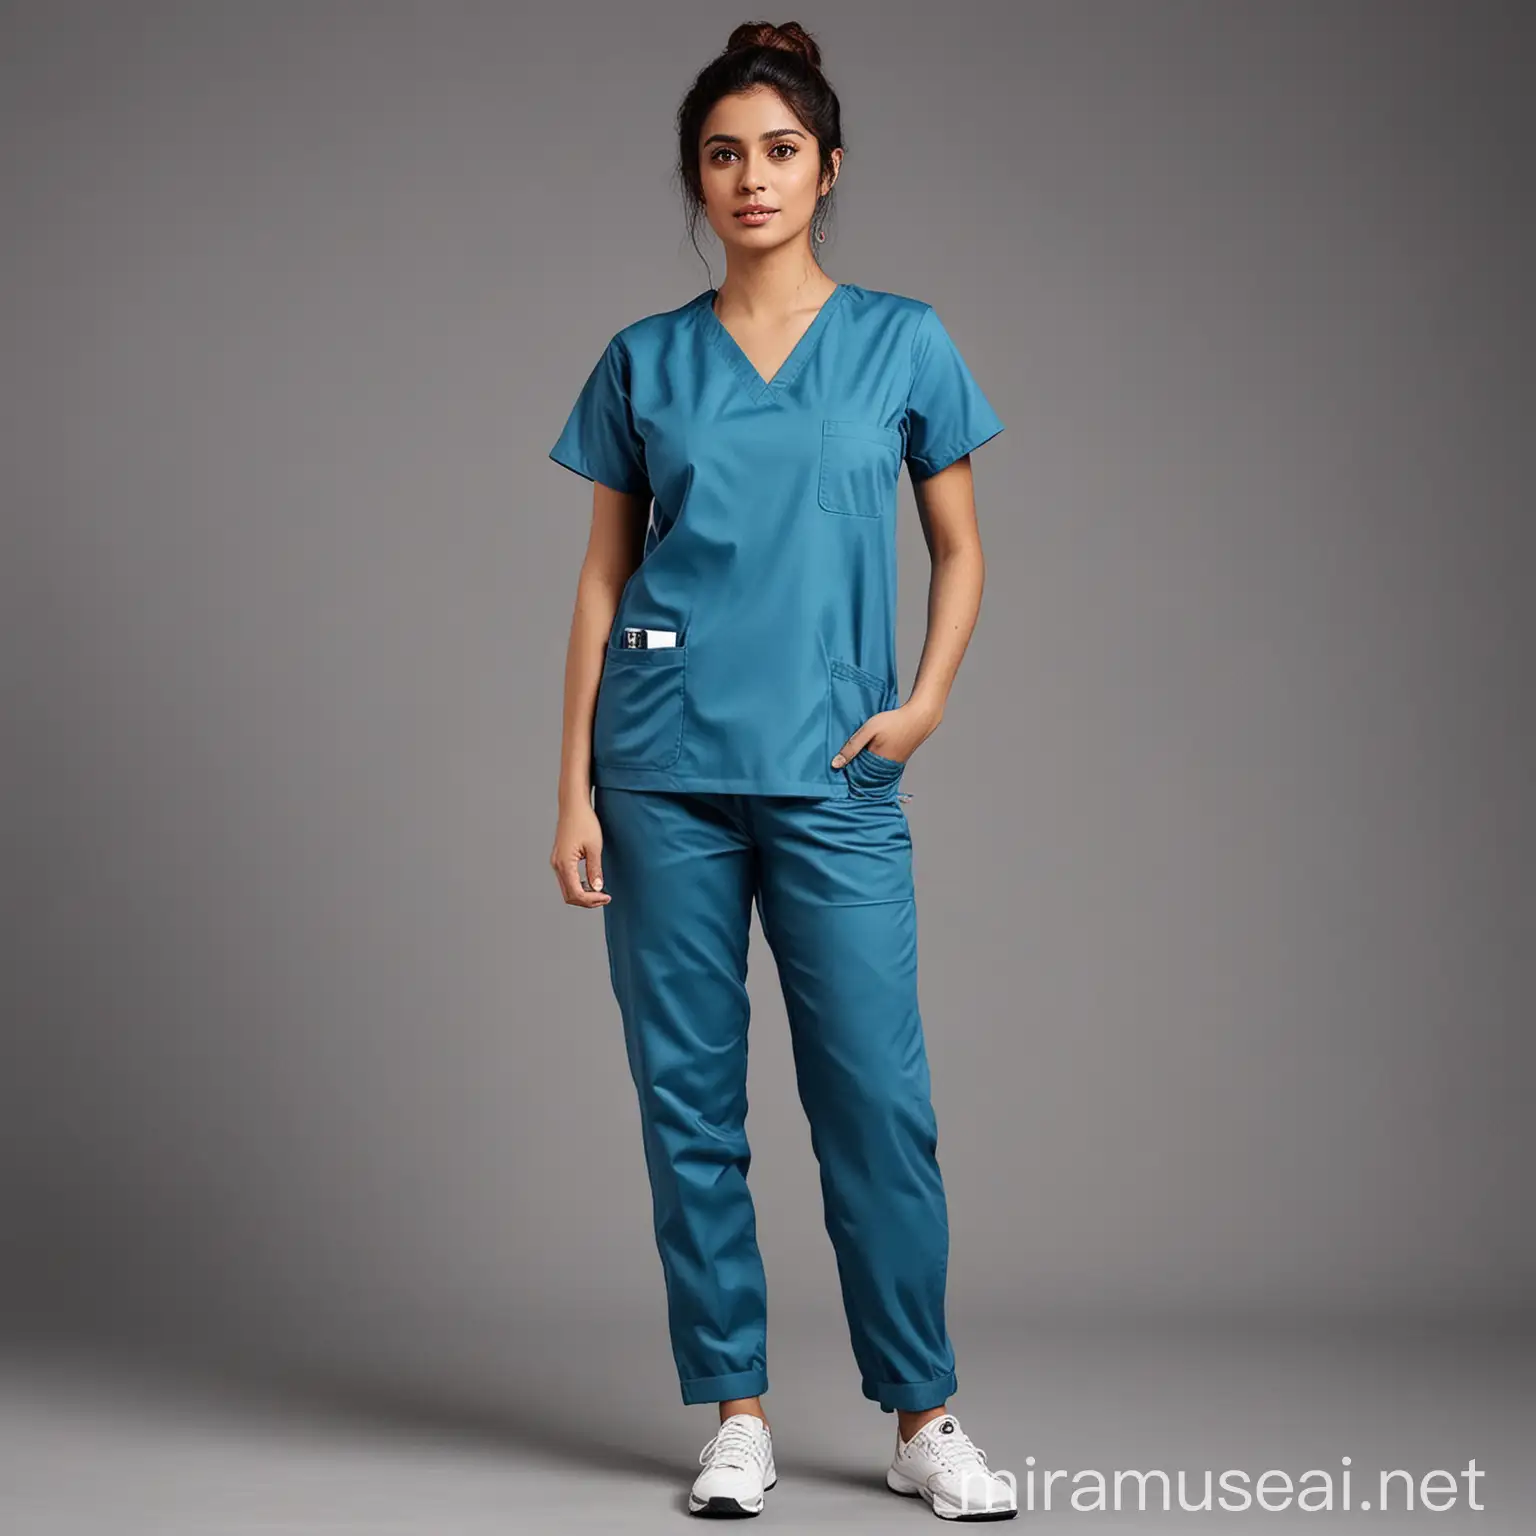 Generate image for E-commerce for Doctor Scrub suit, Indian model stylish